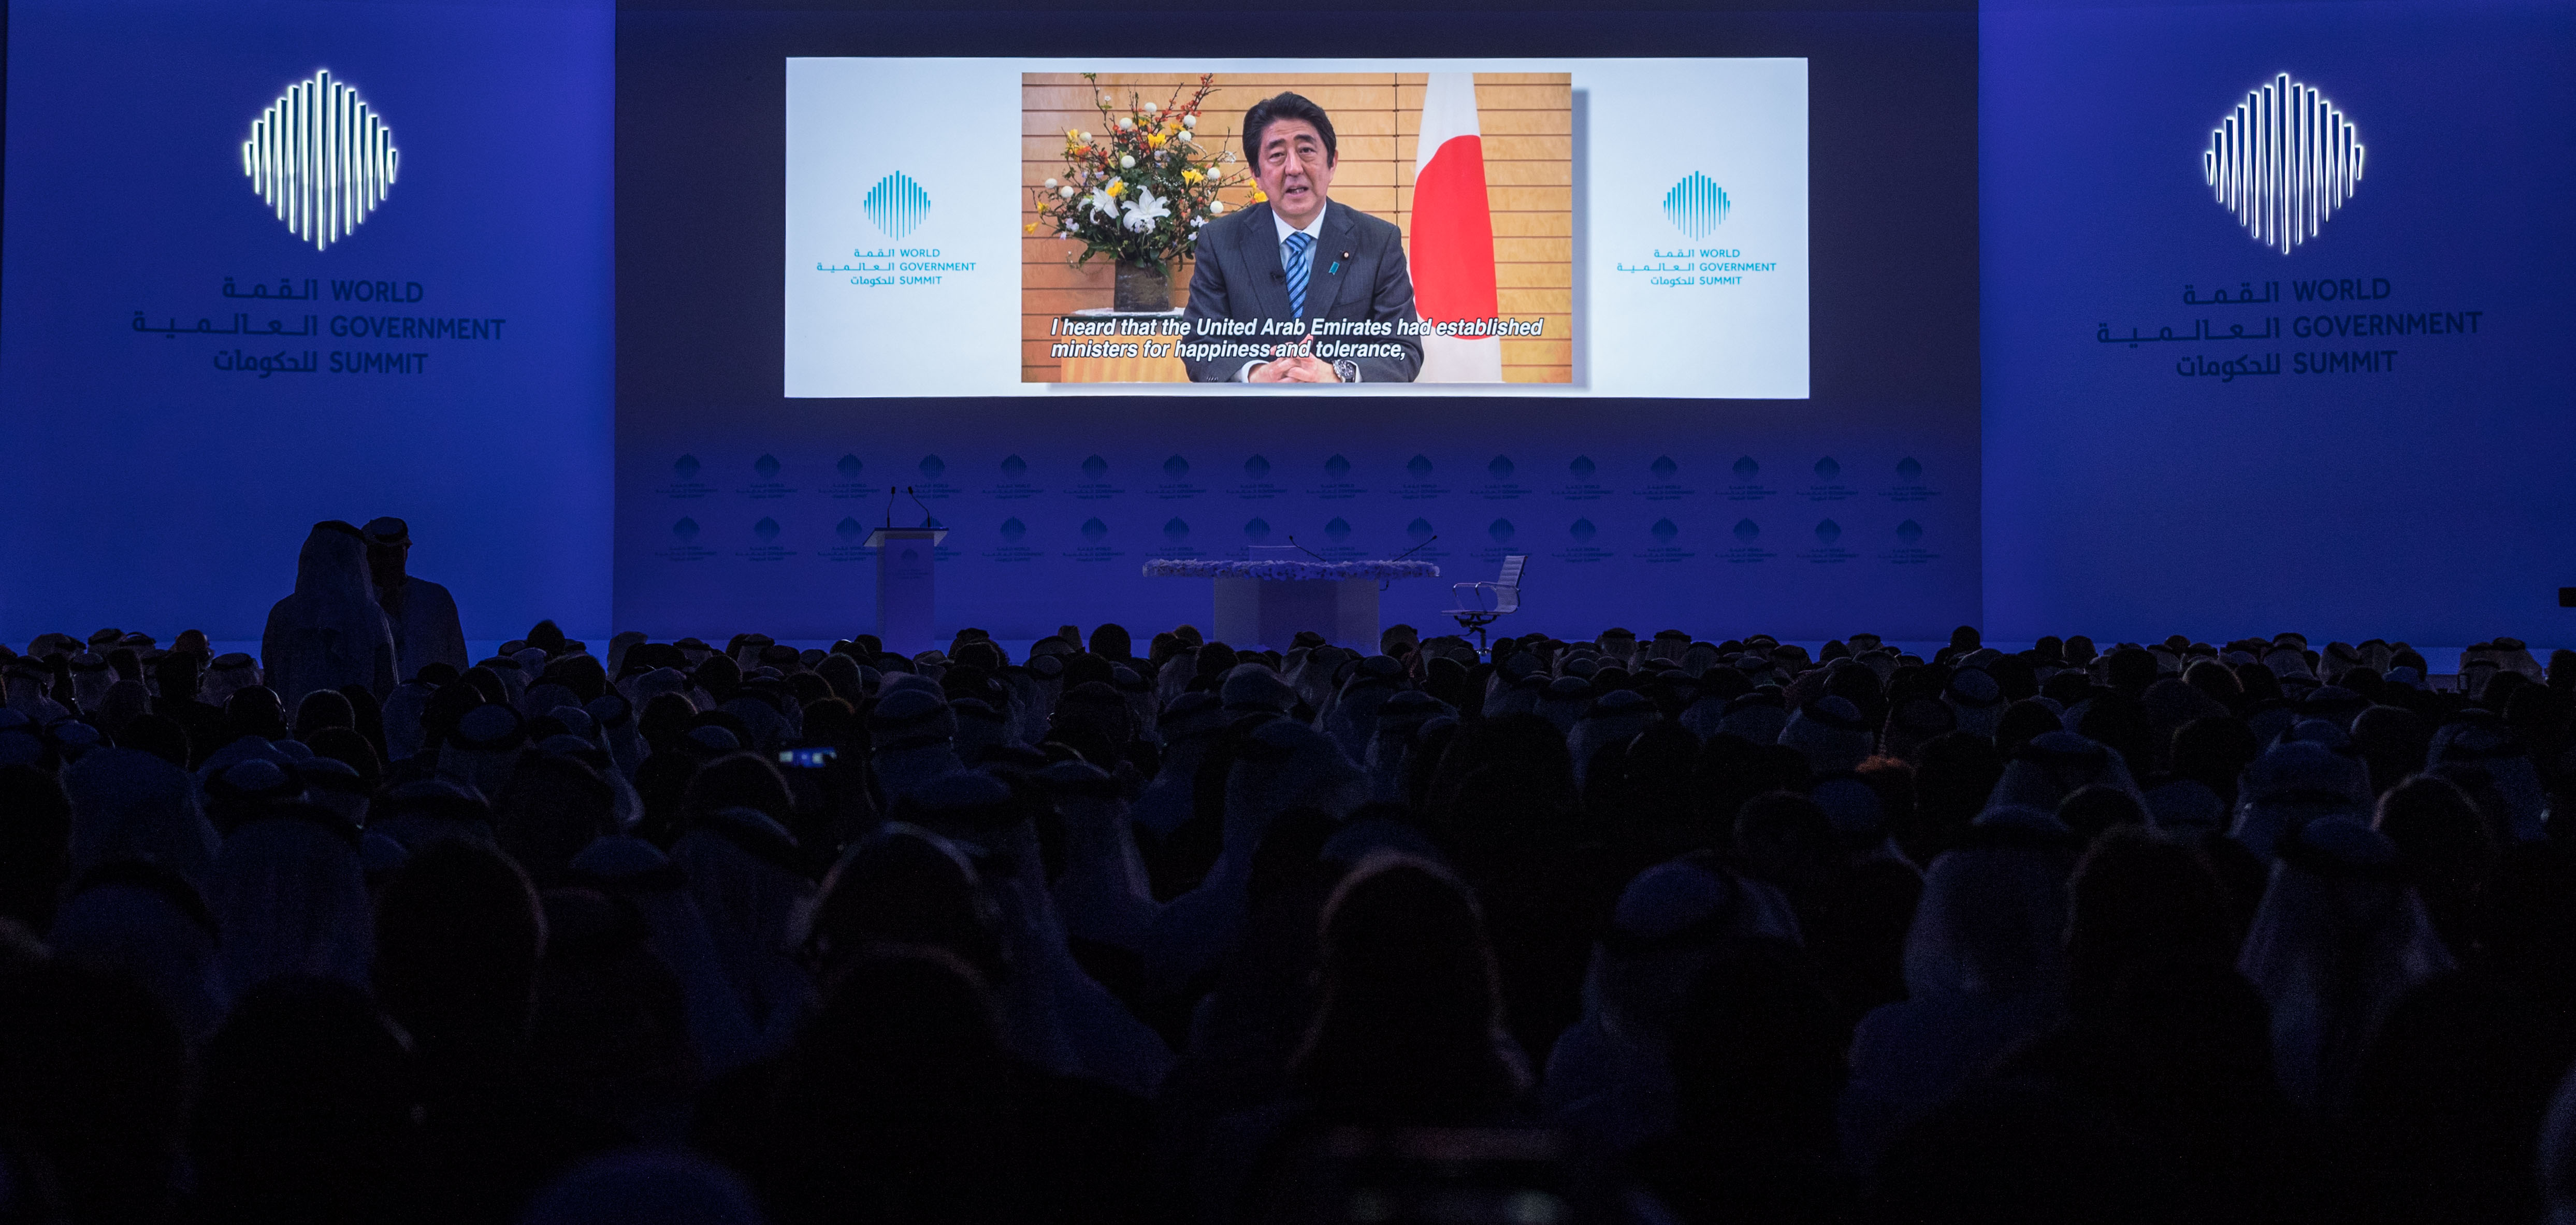 UAE is an example of how all nationalities can work together – Prime Minister of Japan